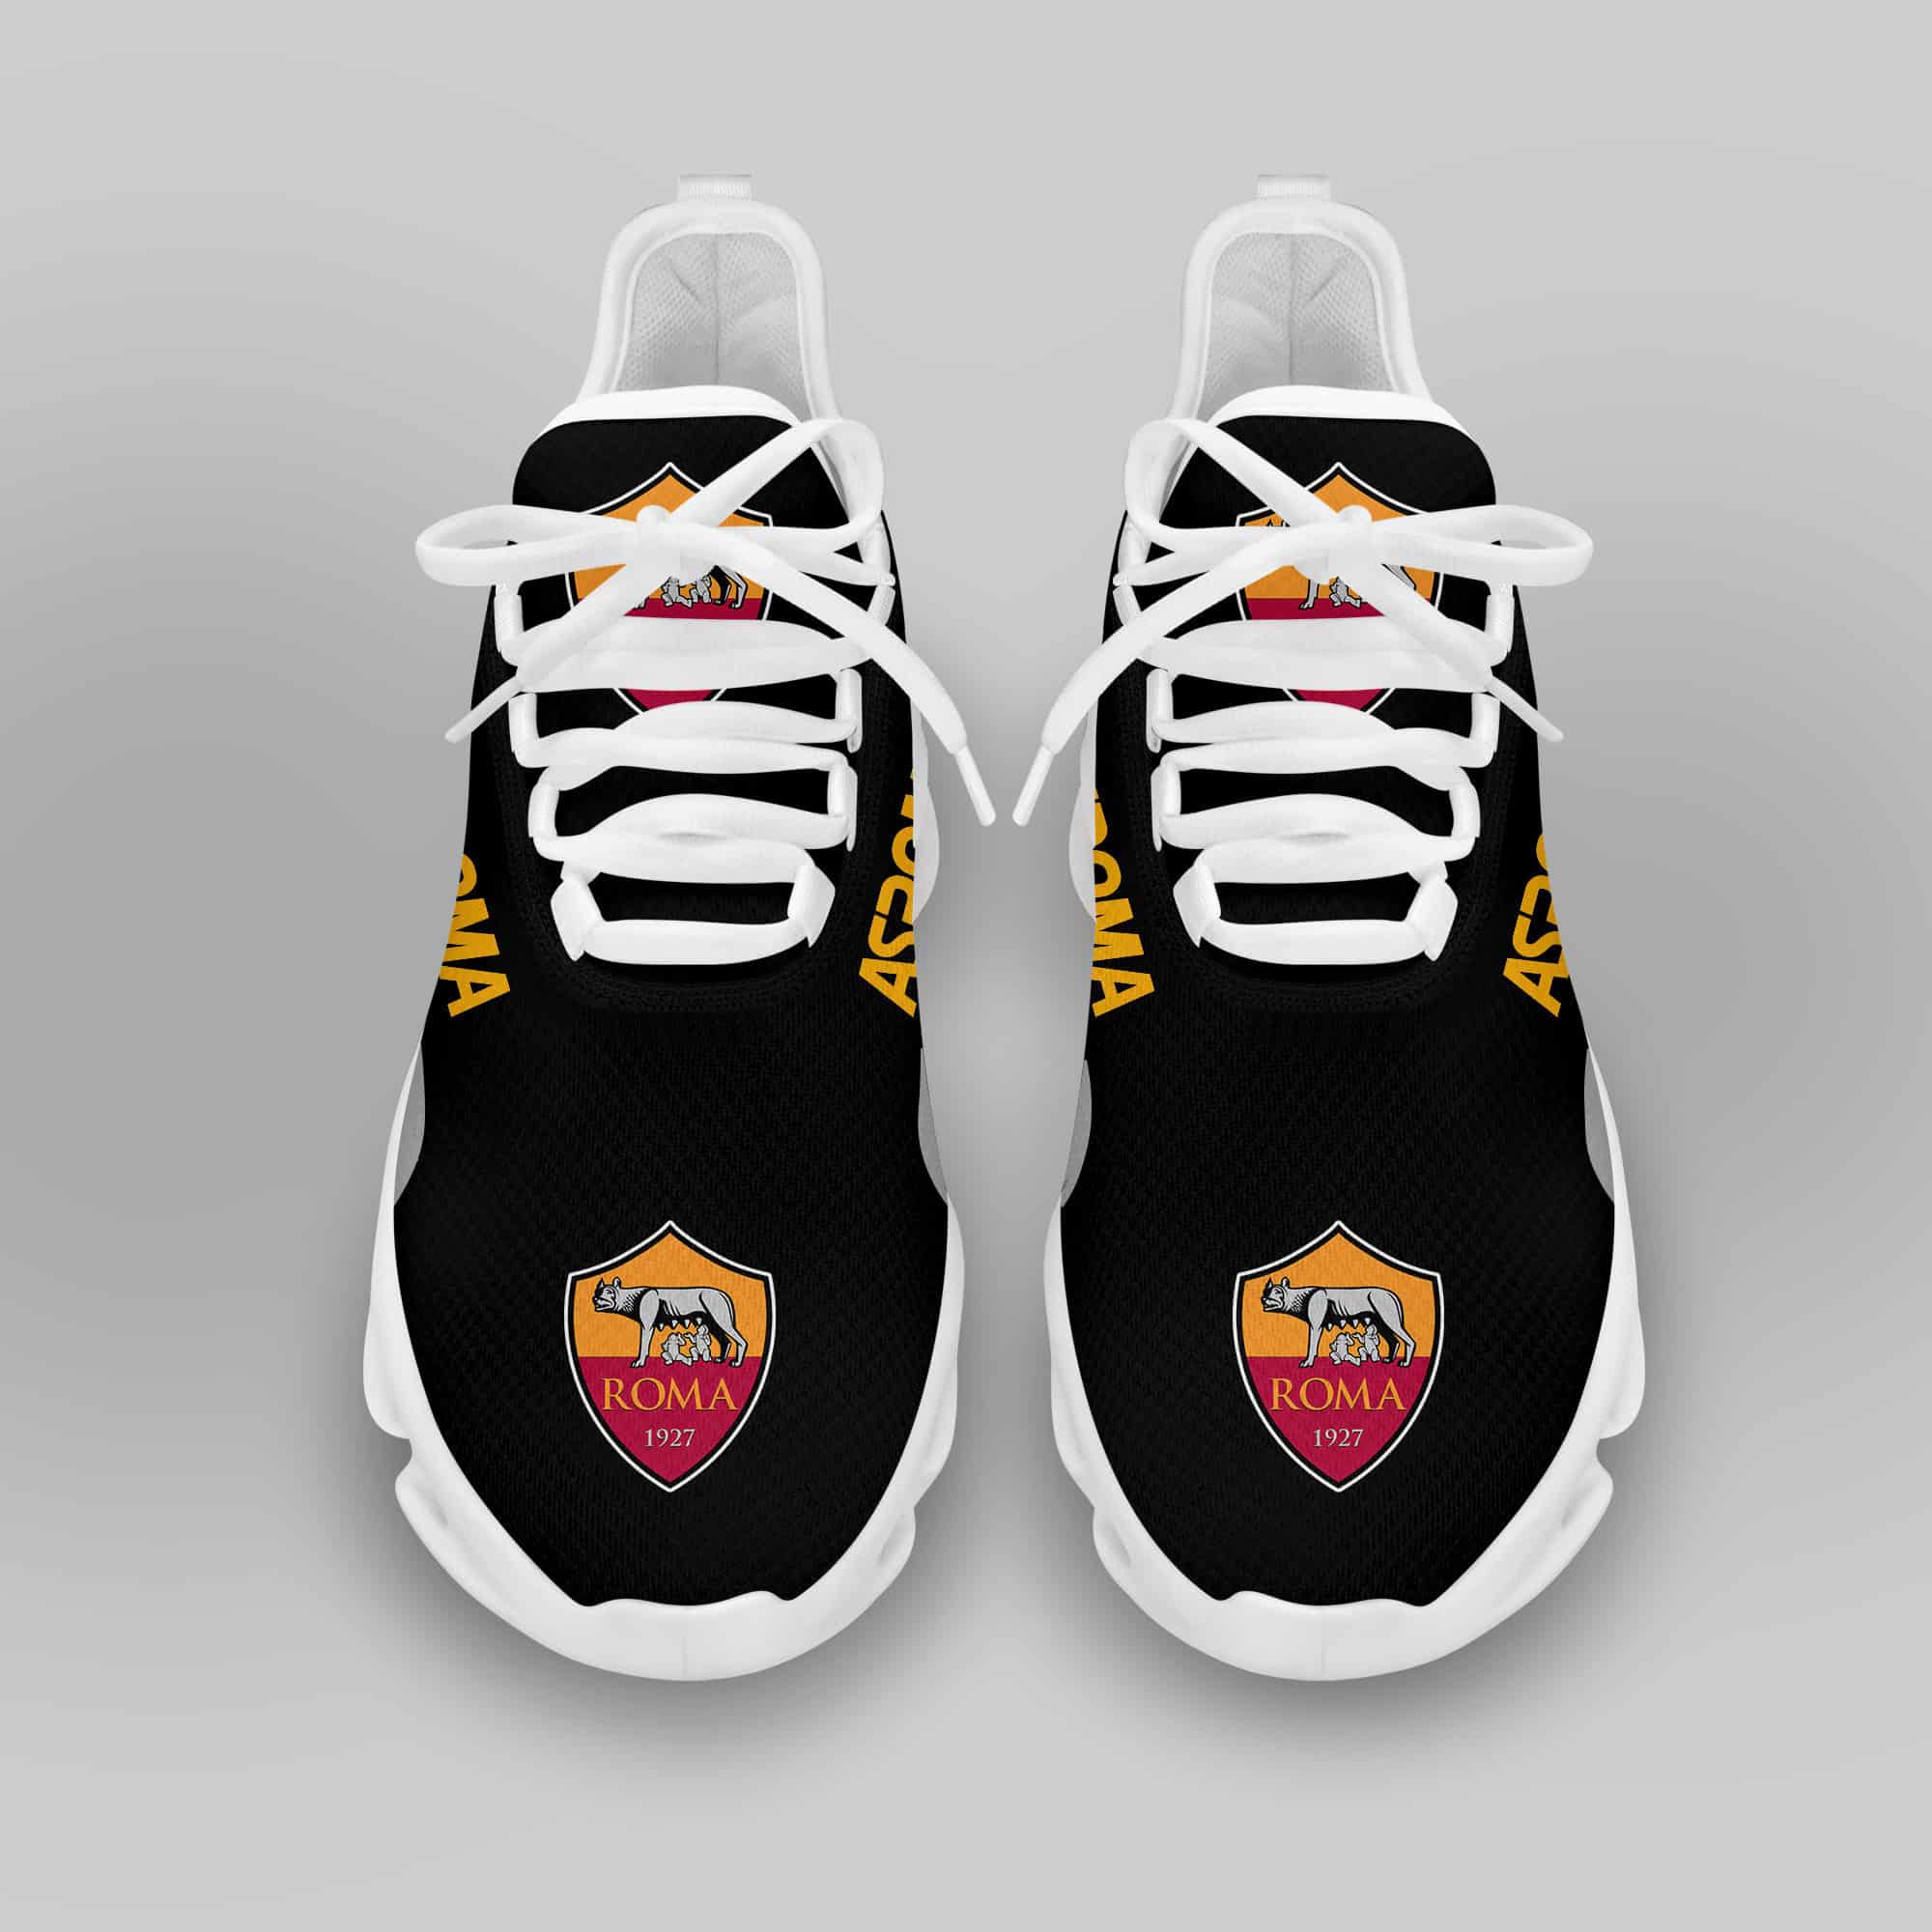 As Roma Running Shoes Max Soul Shoes Sneakers Ver 20 3